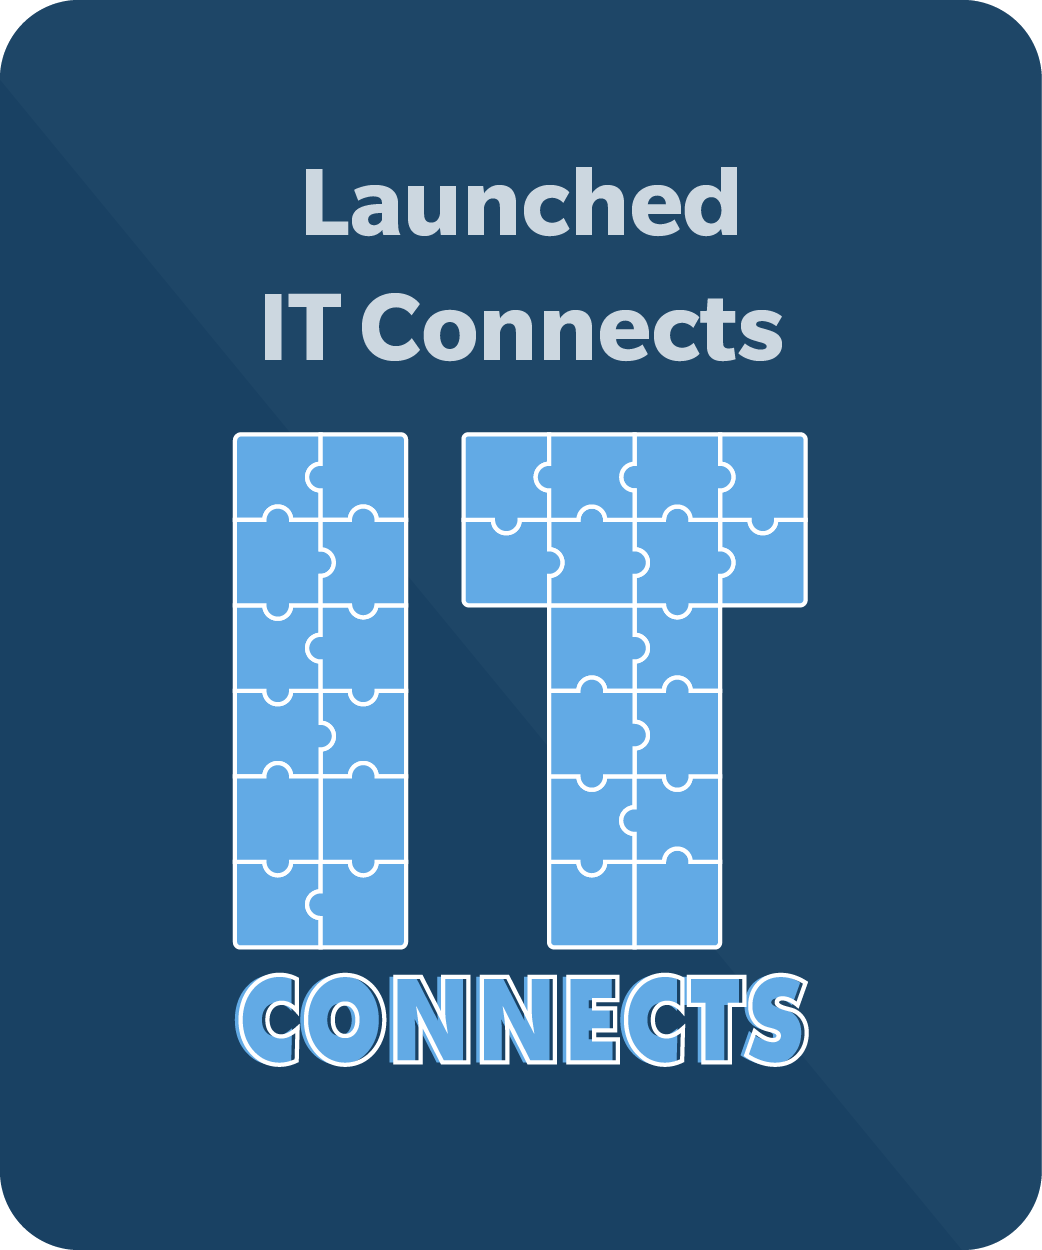 Launched IT Connects, with IT Connects Logo